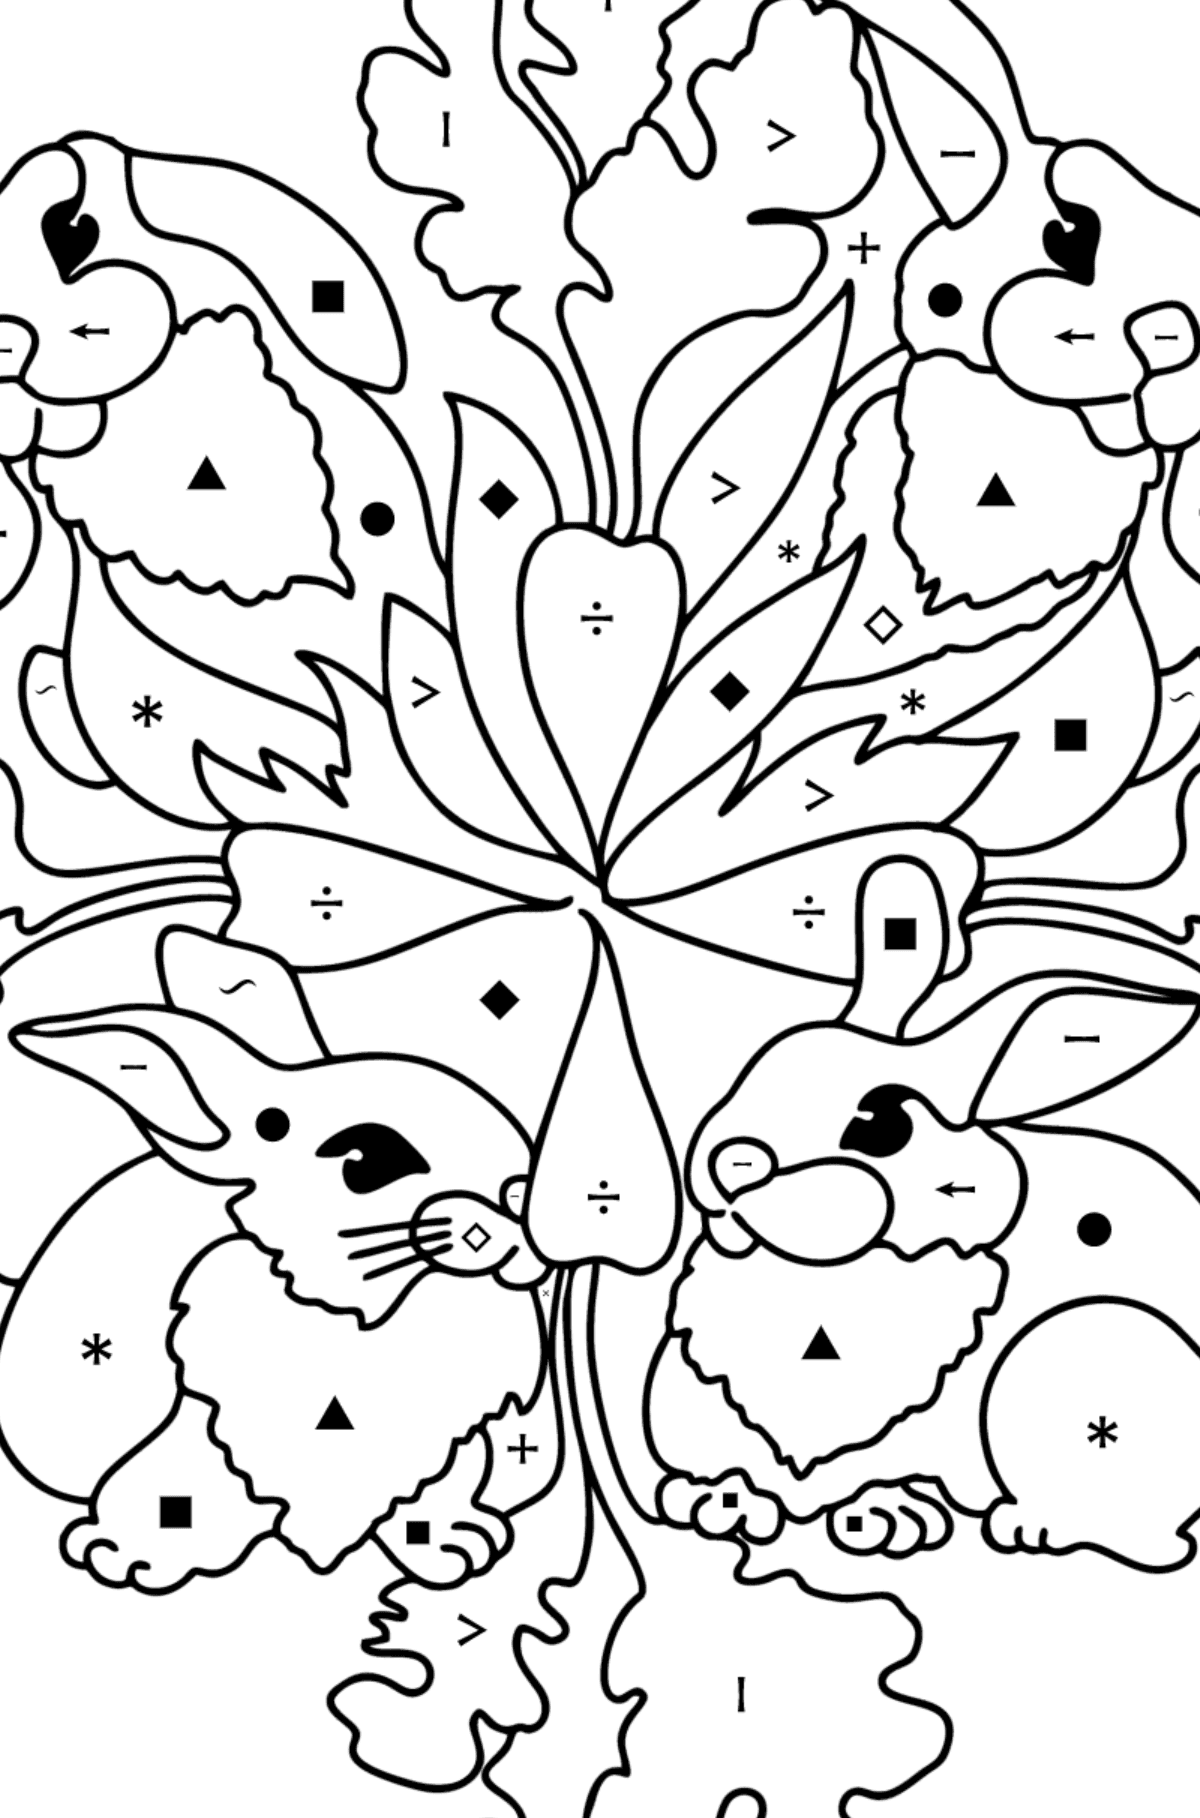 Mandala Bunny coloring page - Coloring by Symbols for Kids